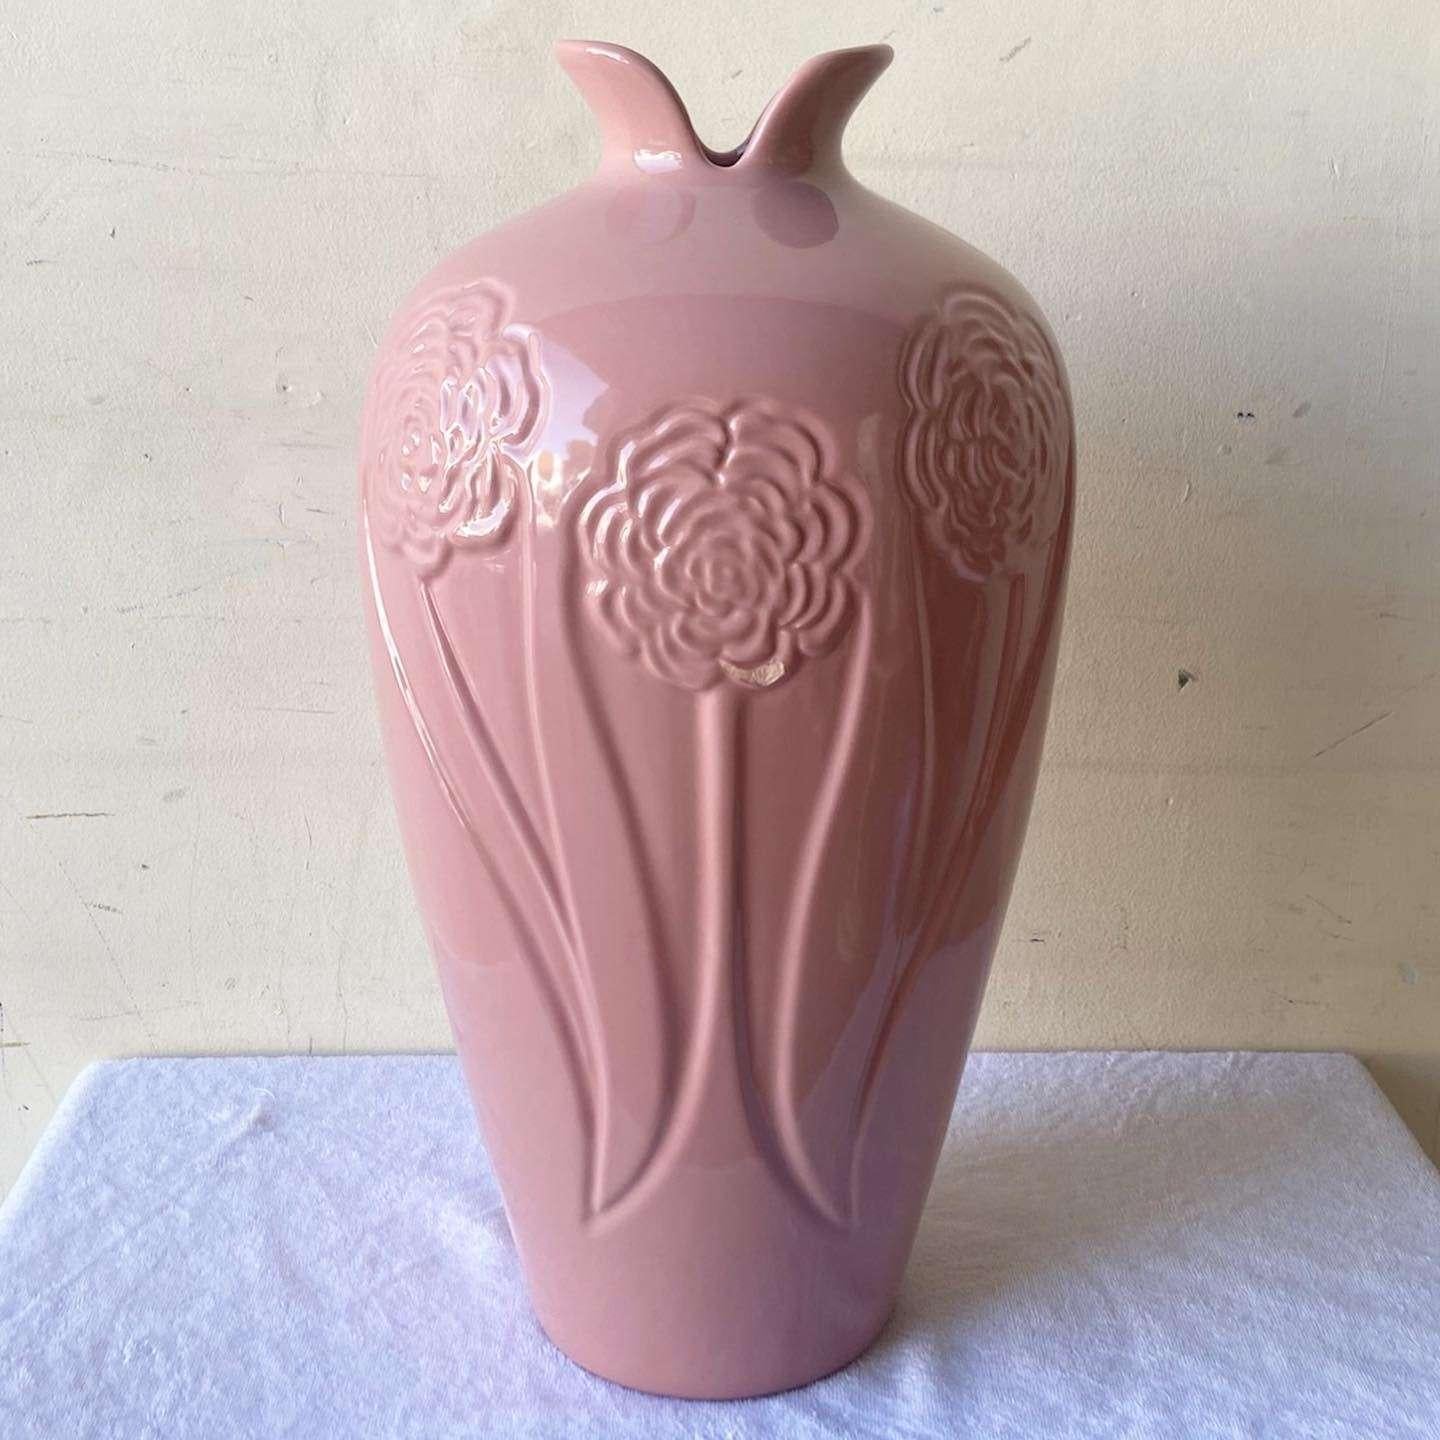 Exceptional vintage Postmodern ceramic floor vase. Features a glossy pink finish with flowers etched around the bust and base.
